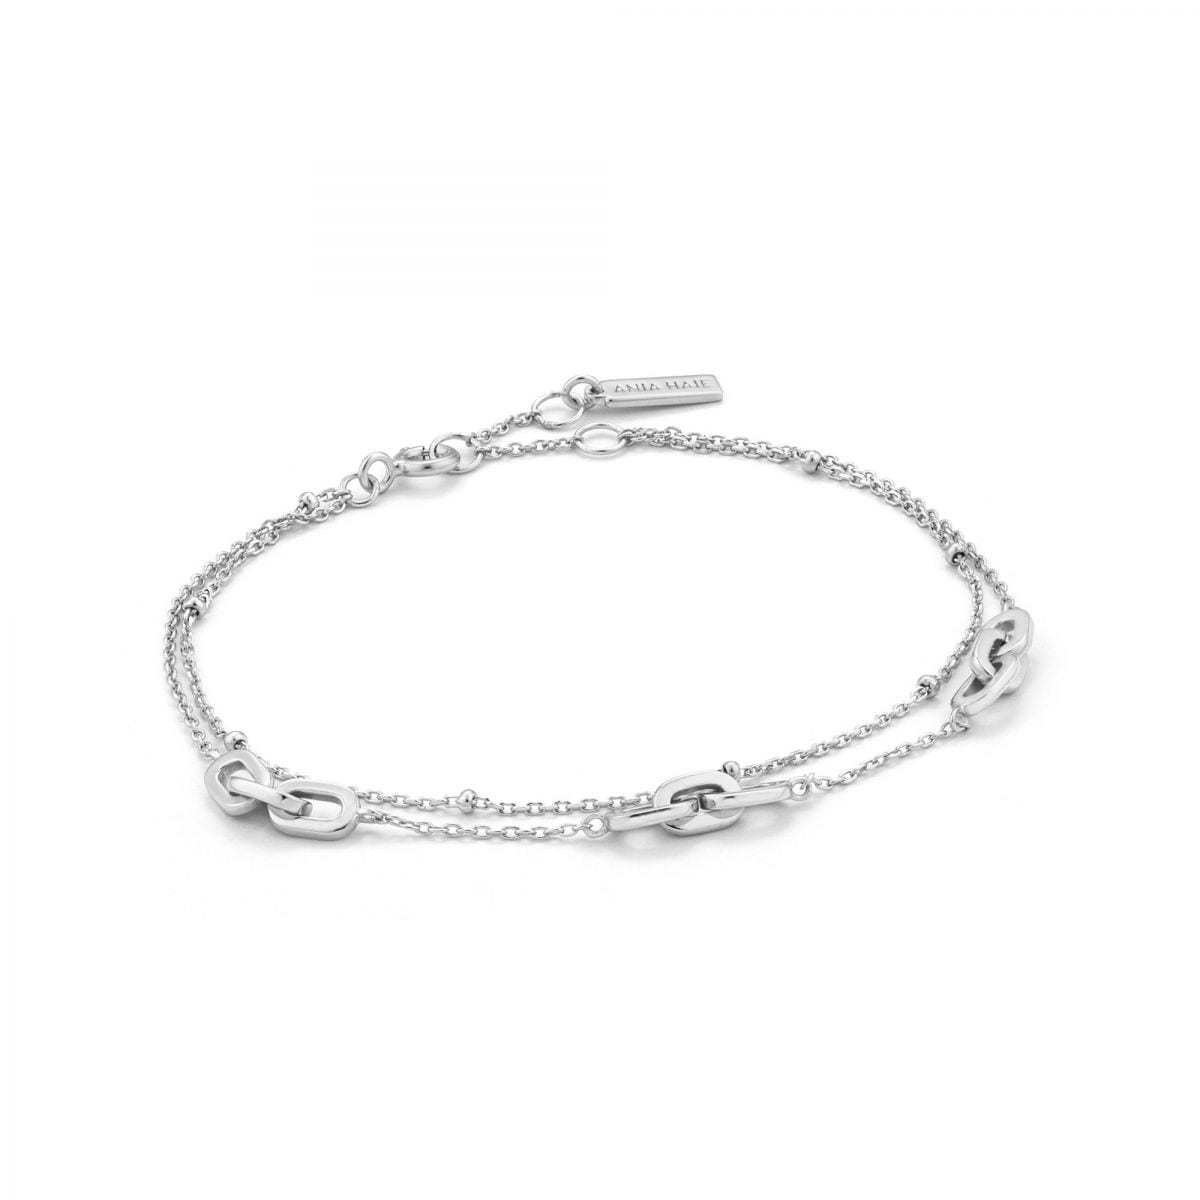 Small Chain Bracelet by Ania Haie - Nelson Coleman Jewelers